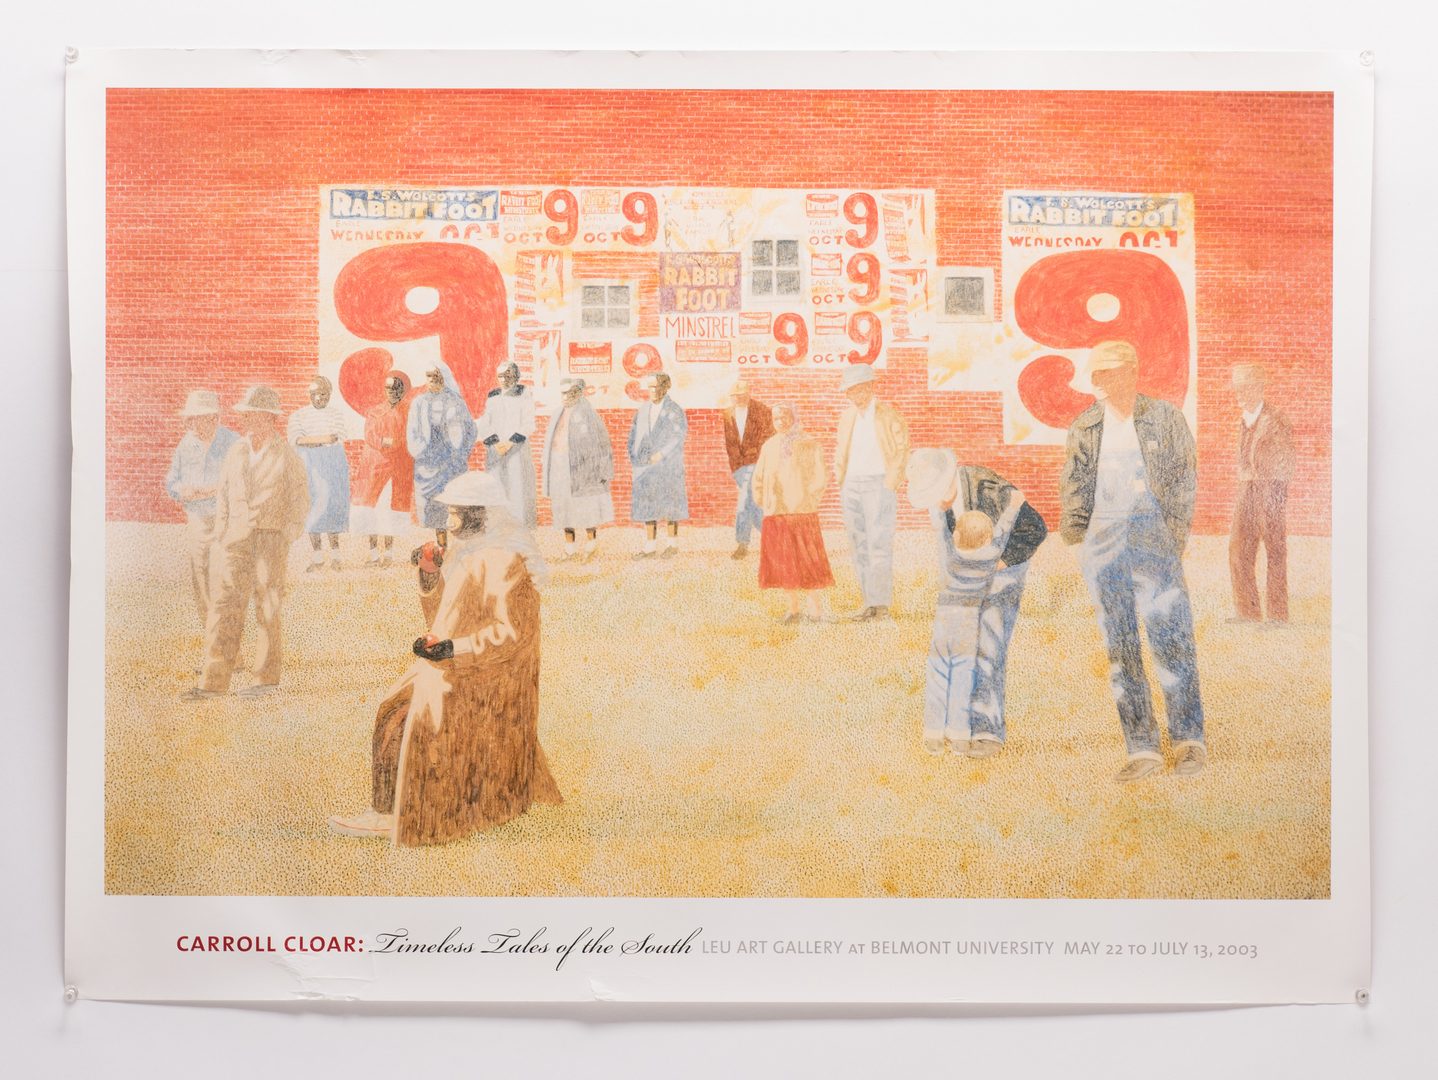 Lot 127: Carroll Cloar painting, The Waiting, with sketch and poster